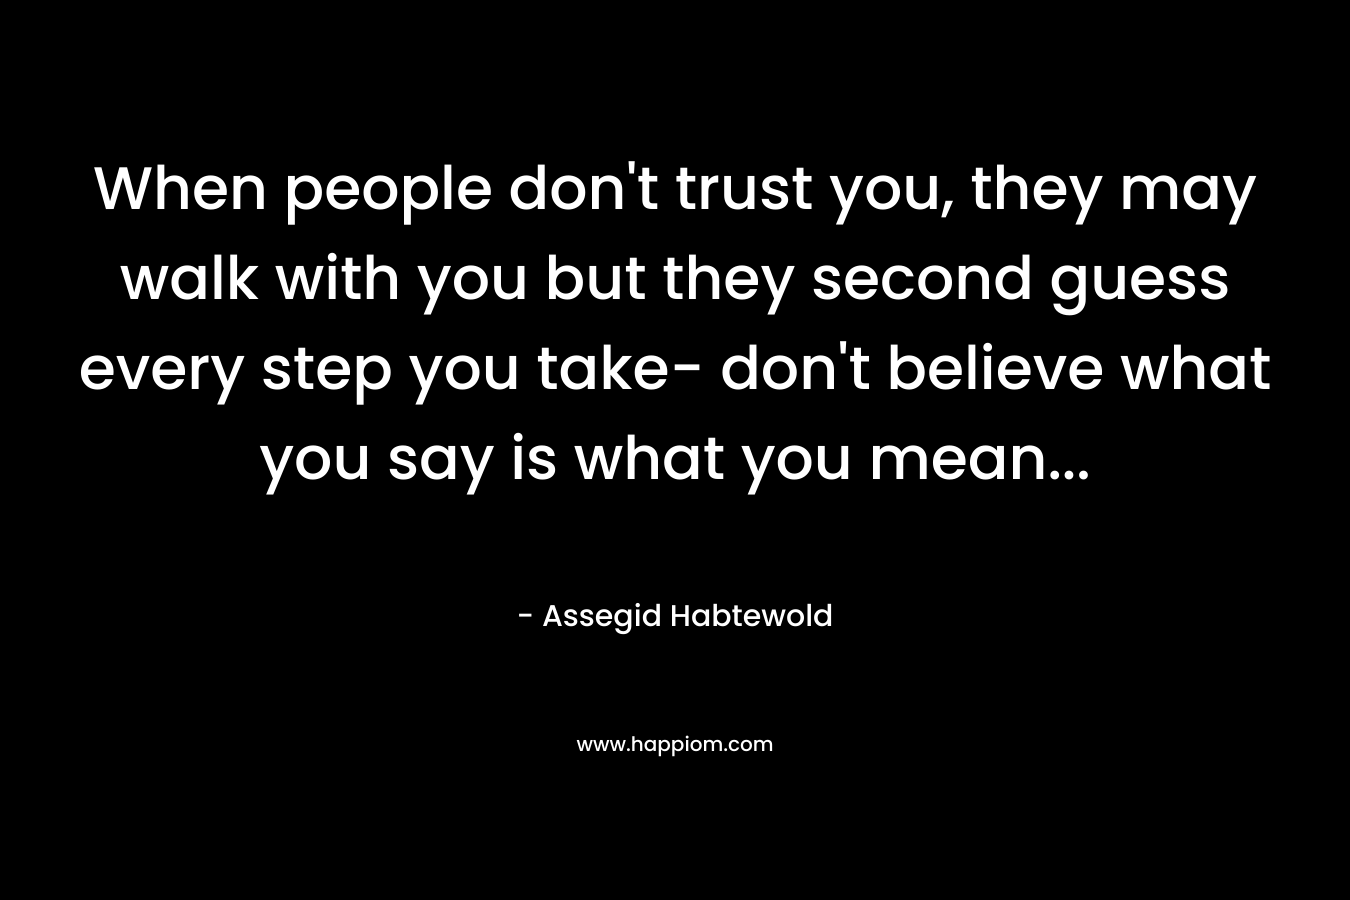 When people don't trust you, they may walk with you but they second guess every step you take- don't believe what you say is what you mean...